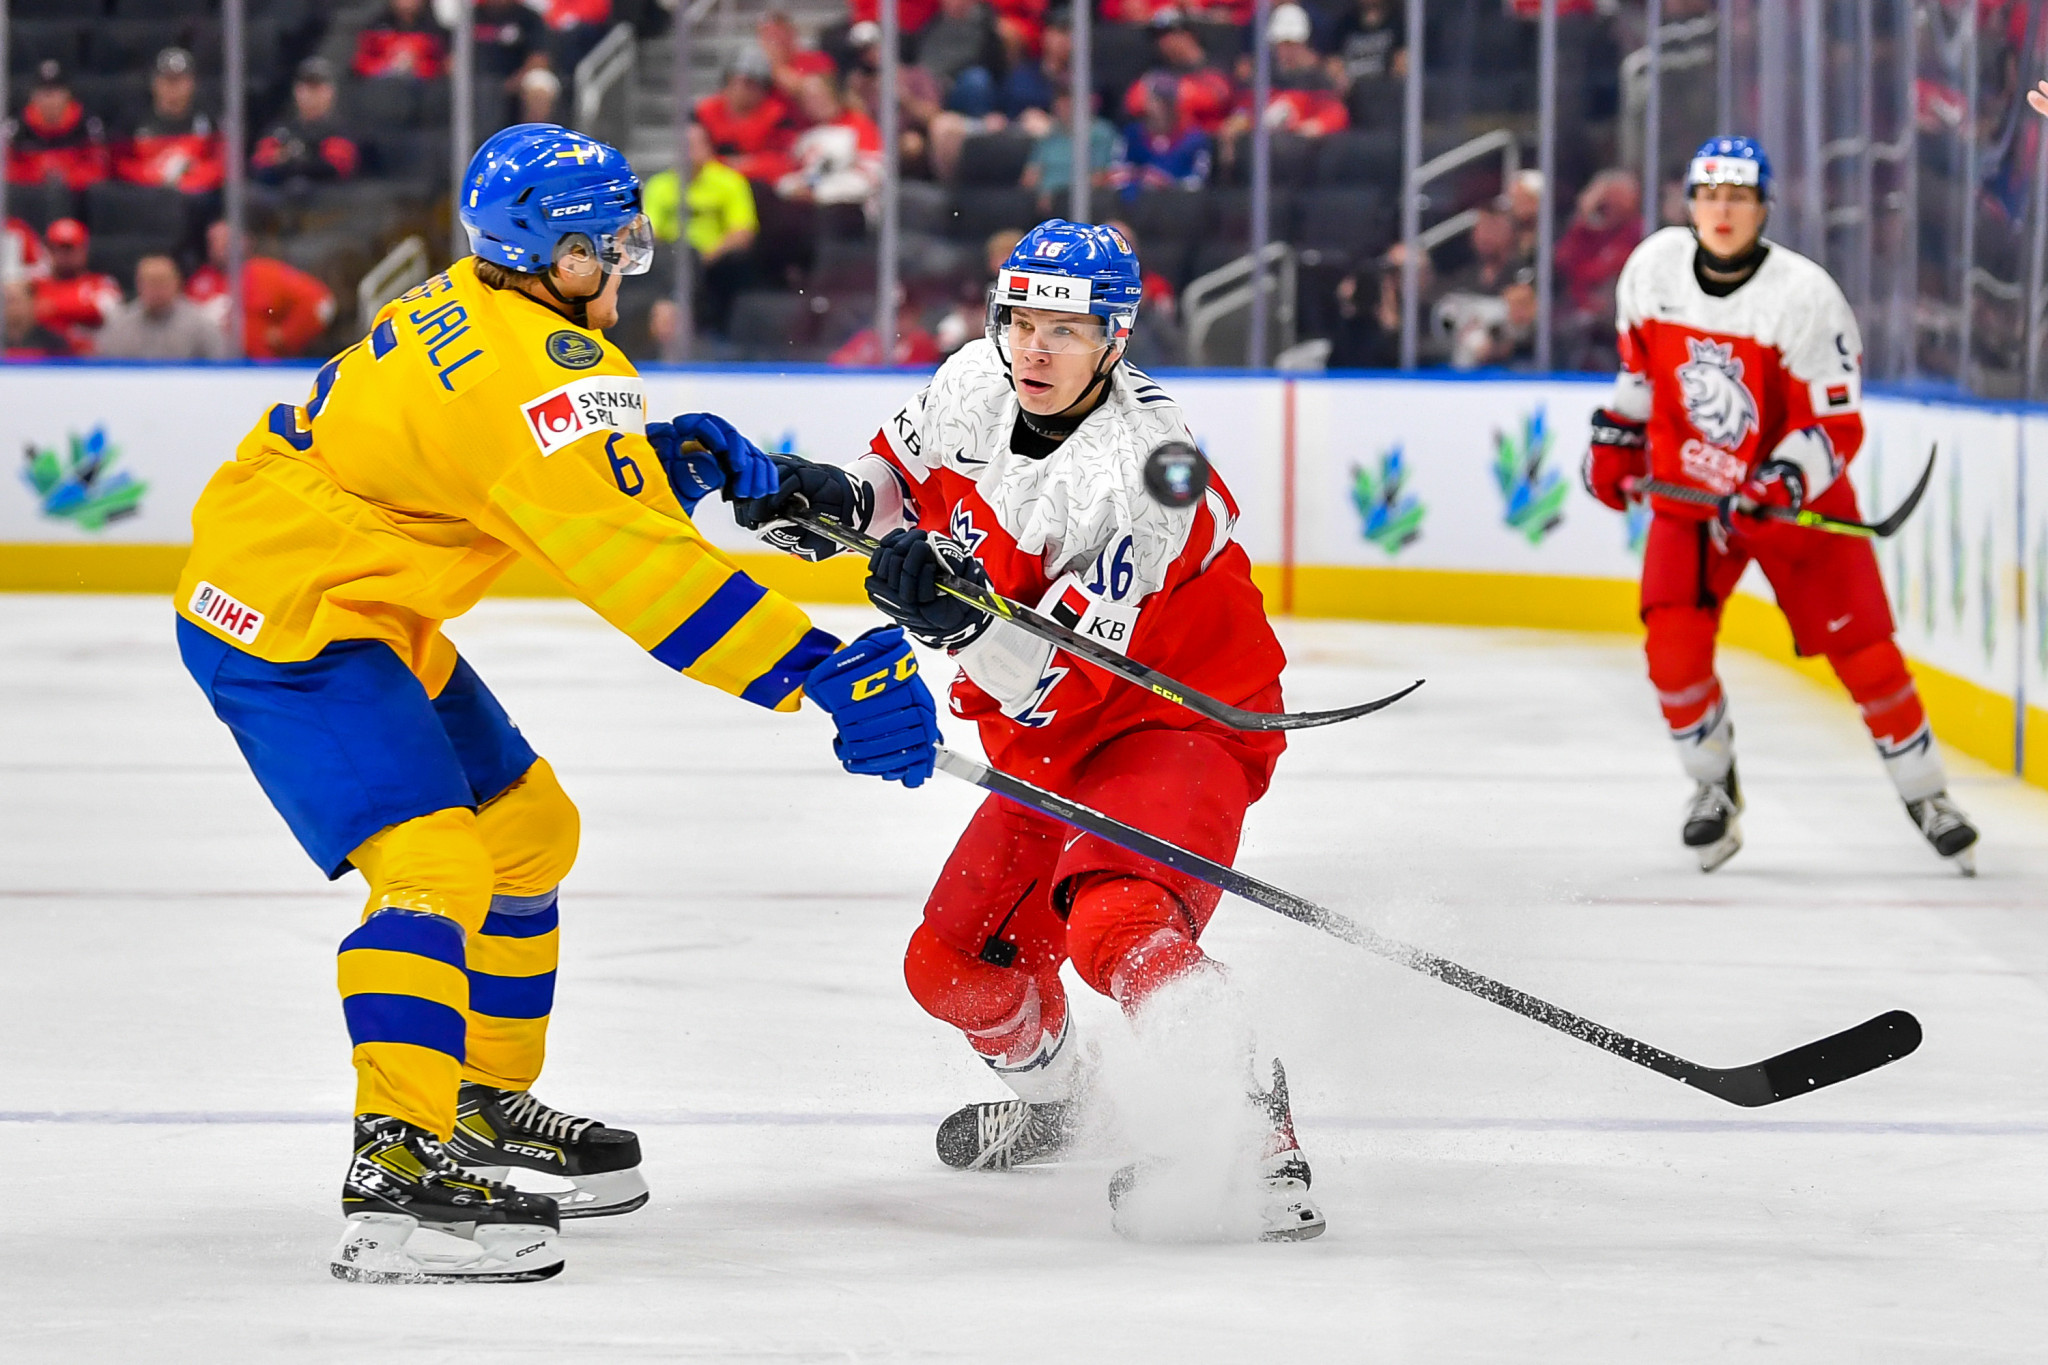 High prices and scandal blamed for low crowds at World Junior Ice Hockey Championship